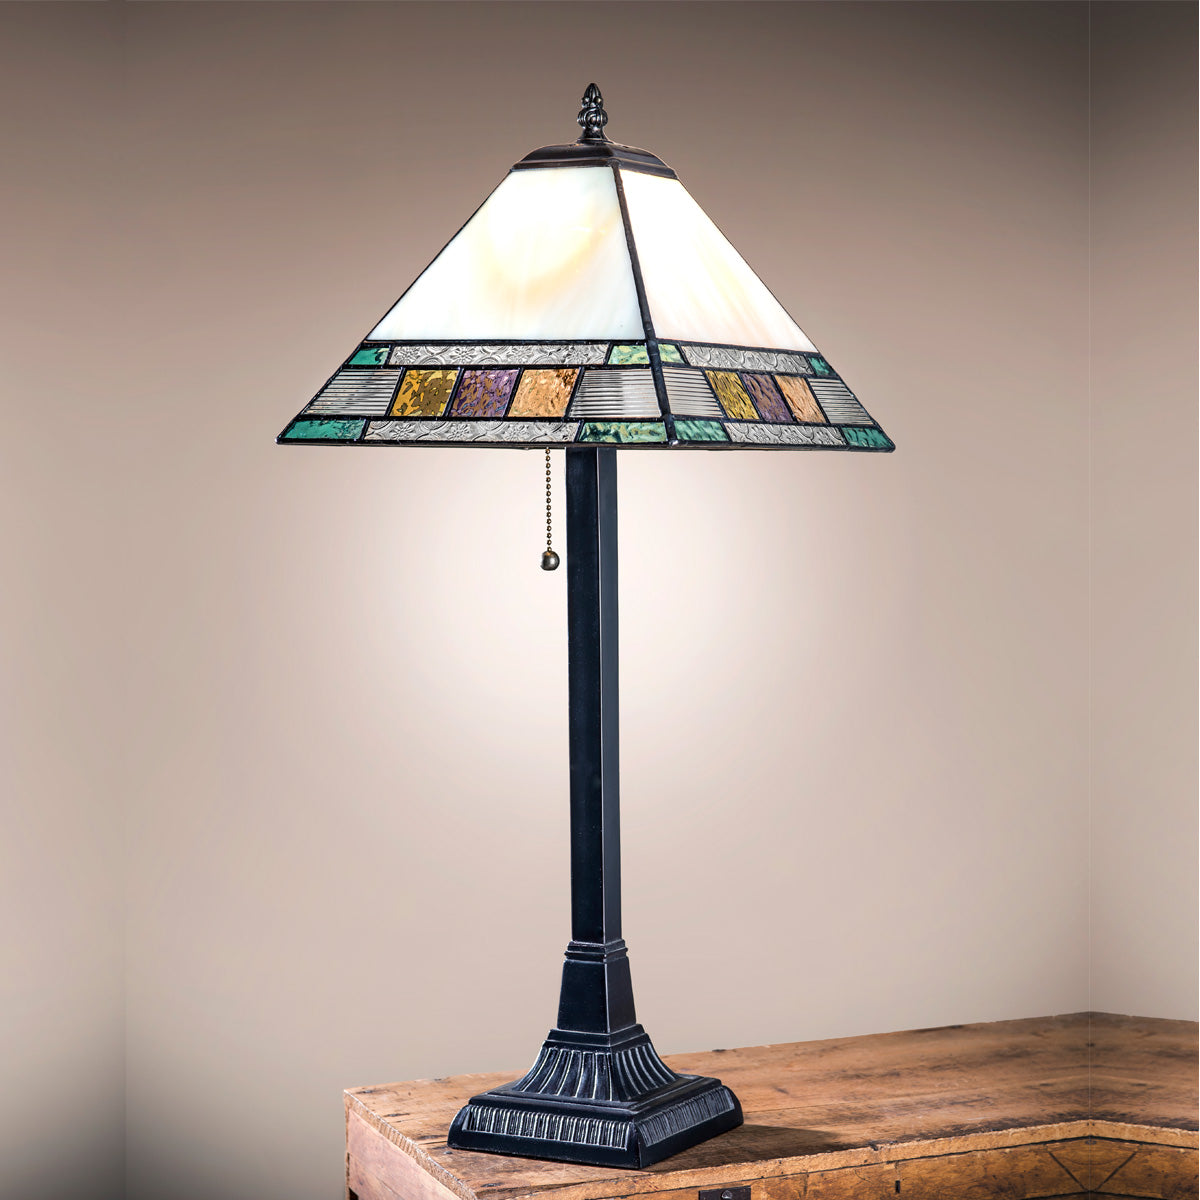 J. Devlin Classic Mission Style Table Lamp 691 tb